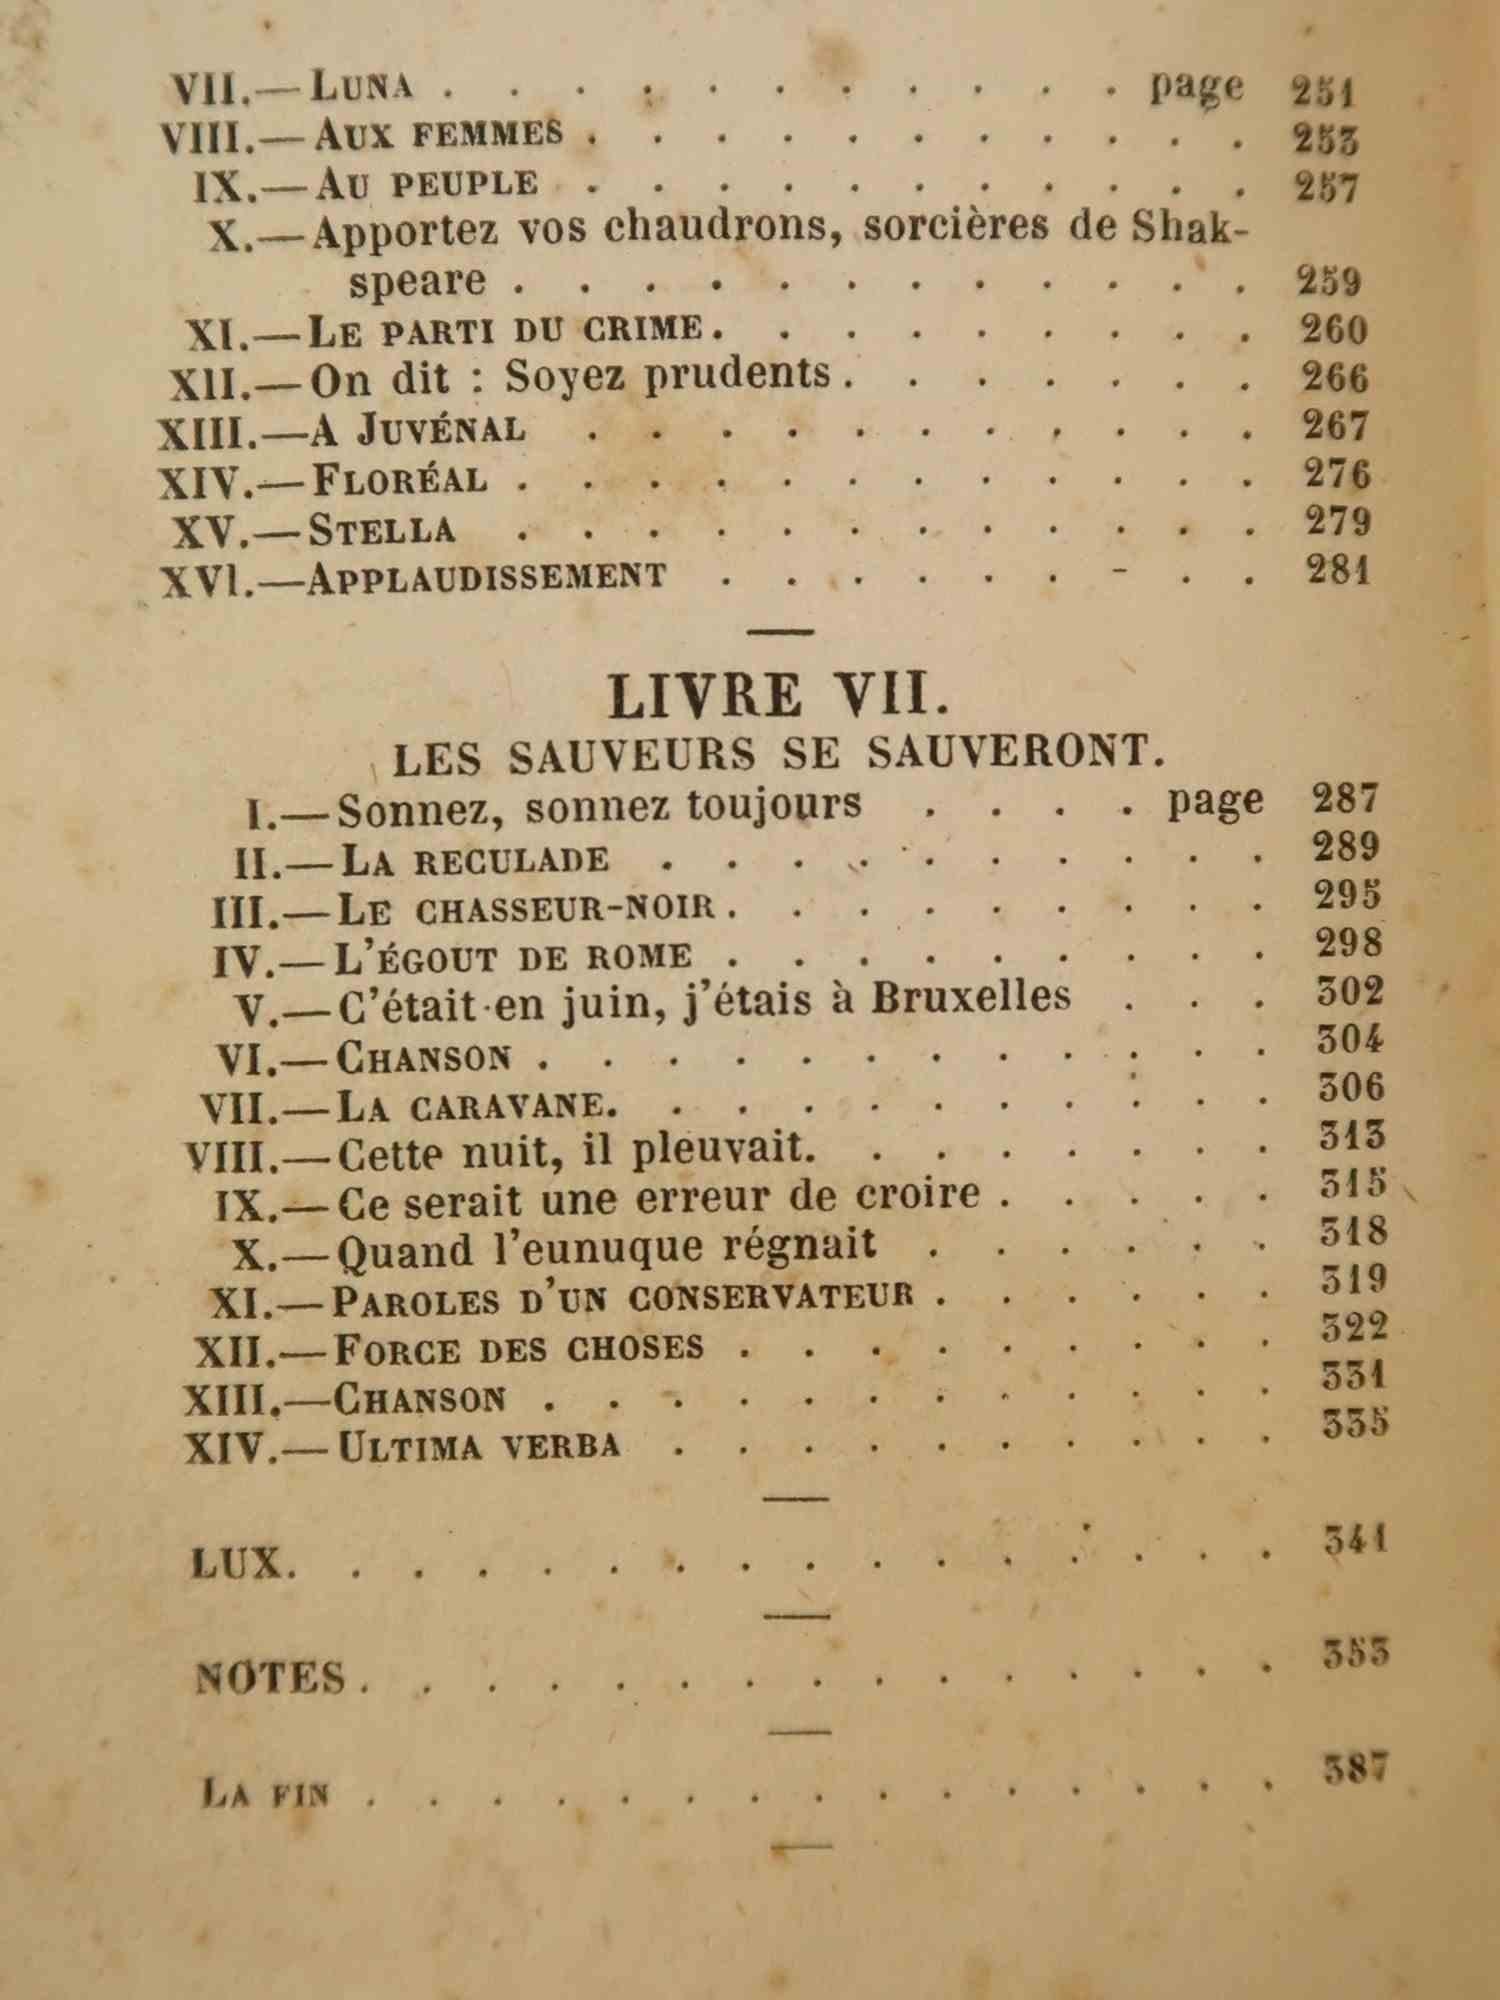 Châtiments - Rare Book by Victor Hugo - 1853 For Sale 4